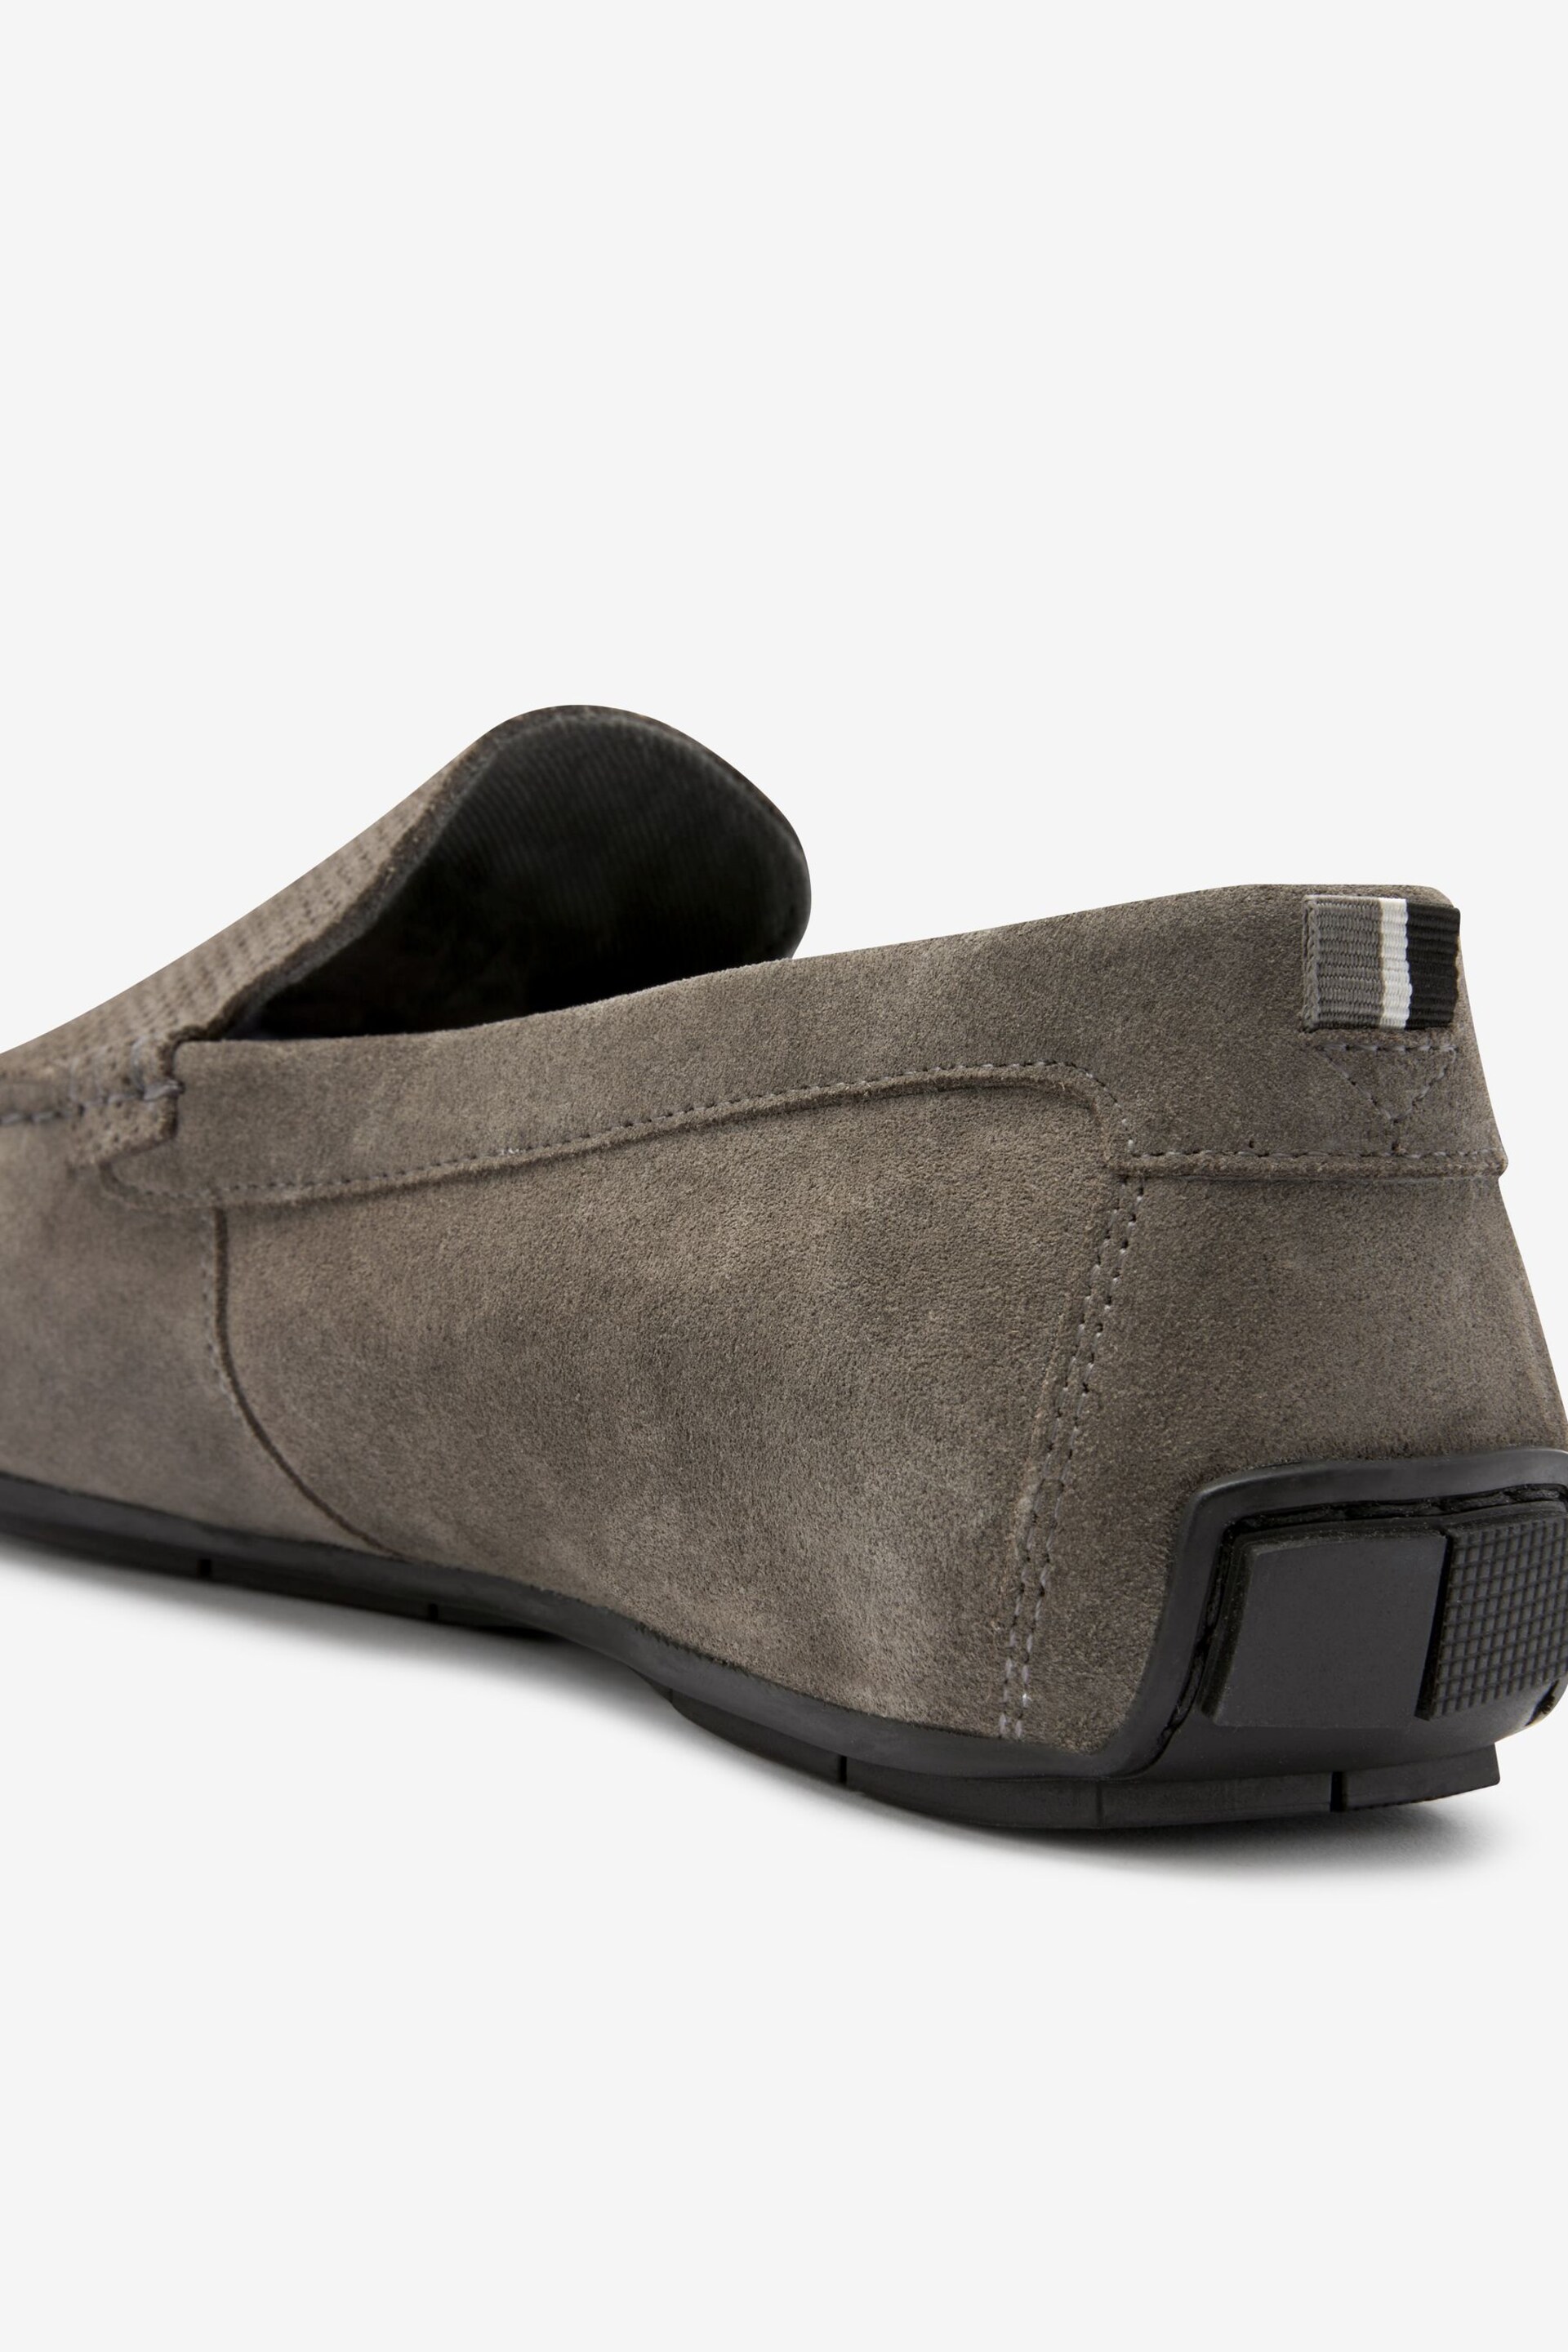 Grey Suede Driver Shoes - Image 5 of 5